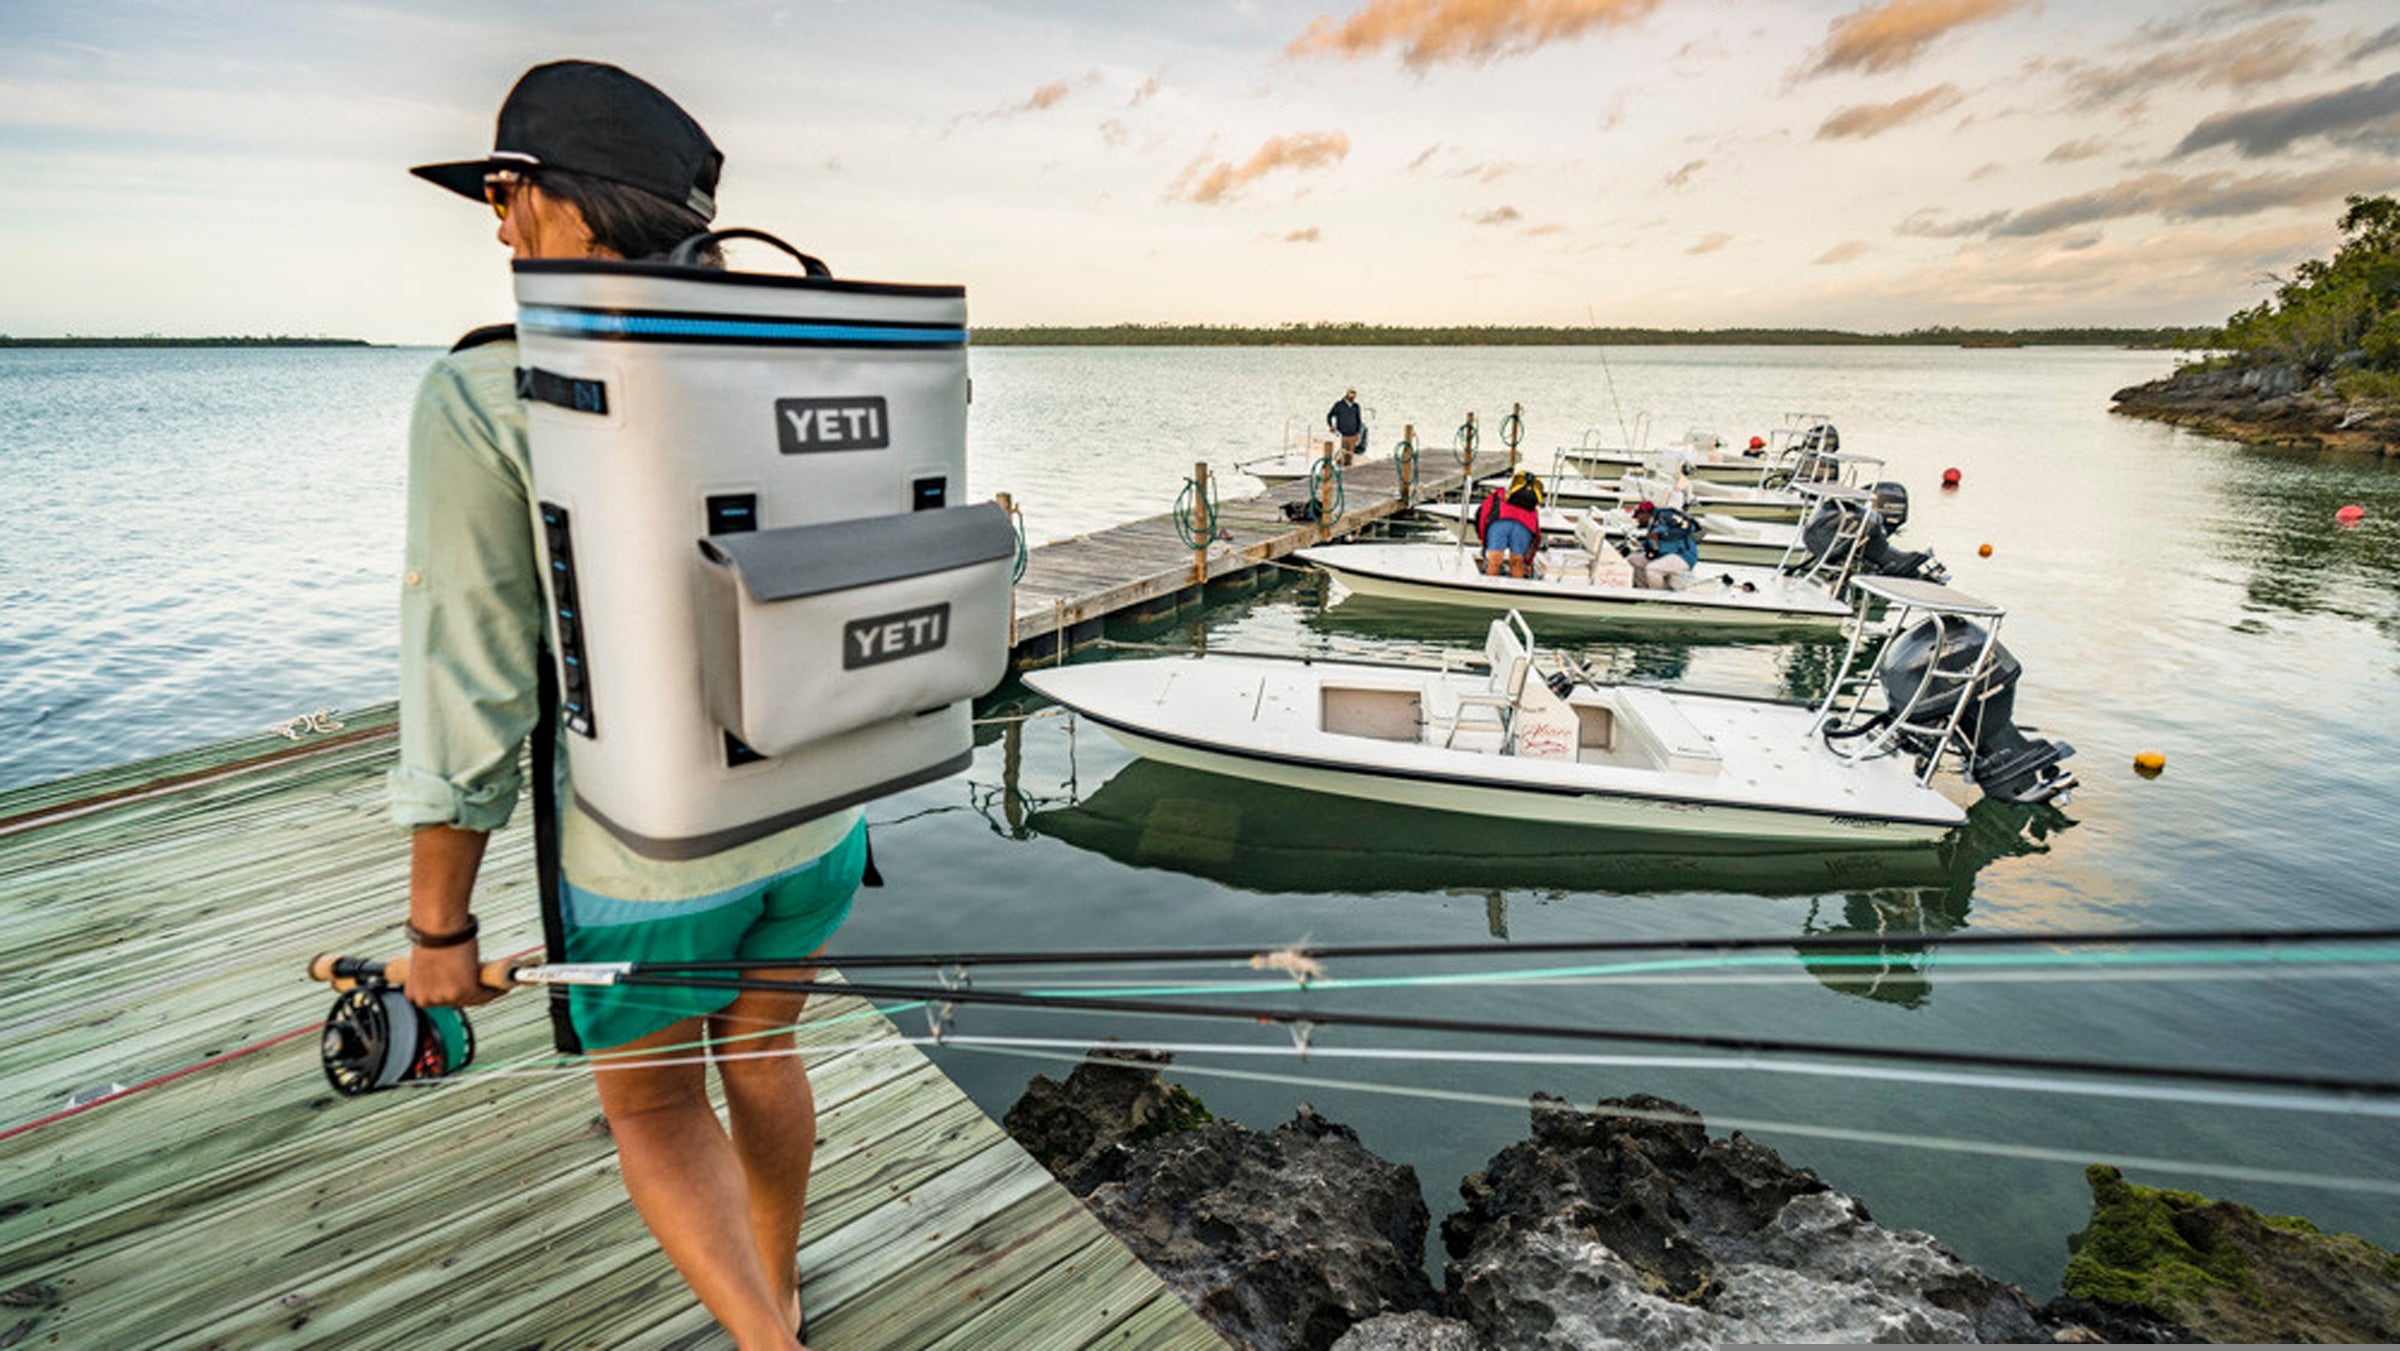 Yeti launches new smaller backpack cooler and cool bag for outdoor  adventures